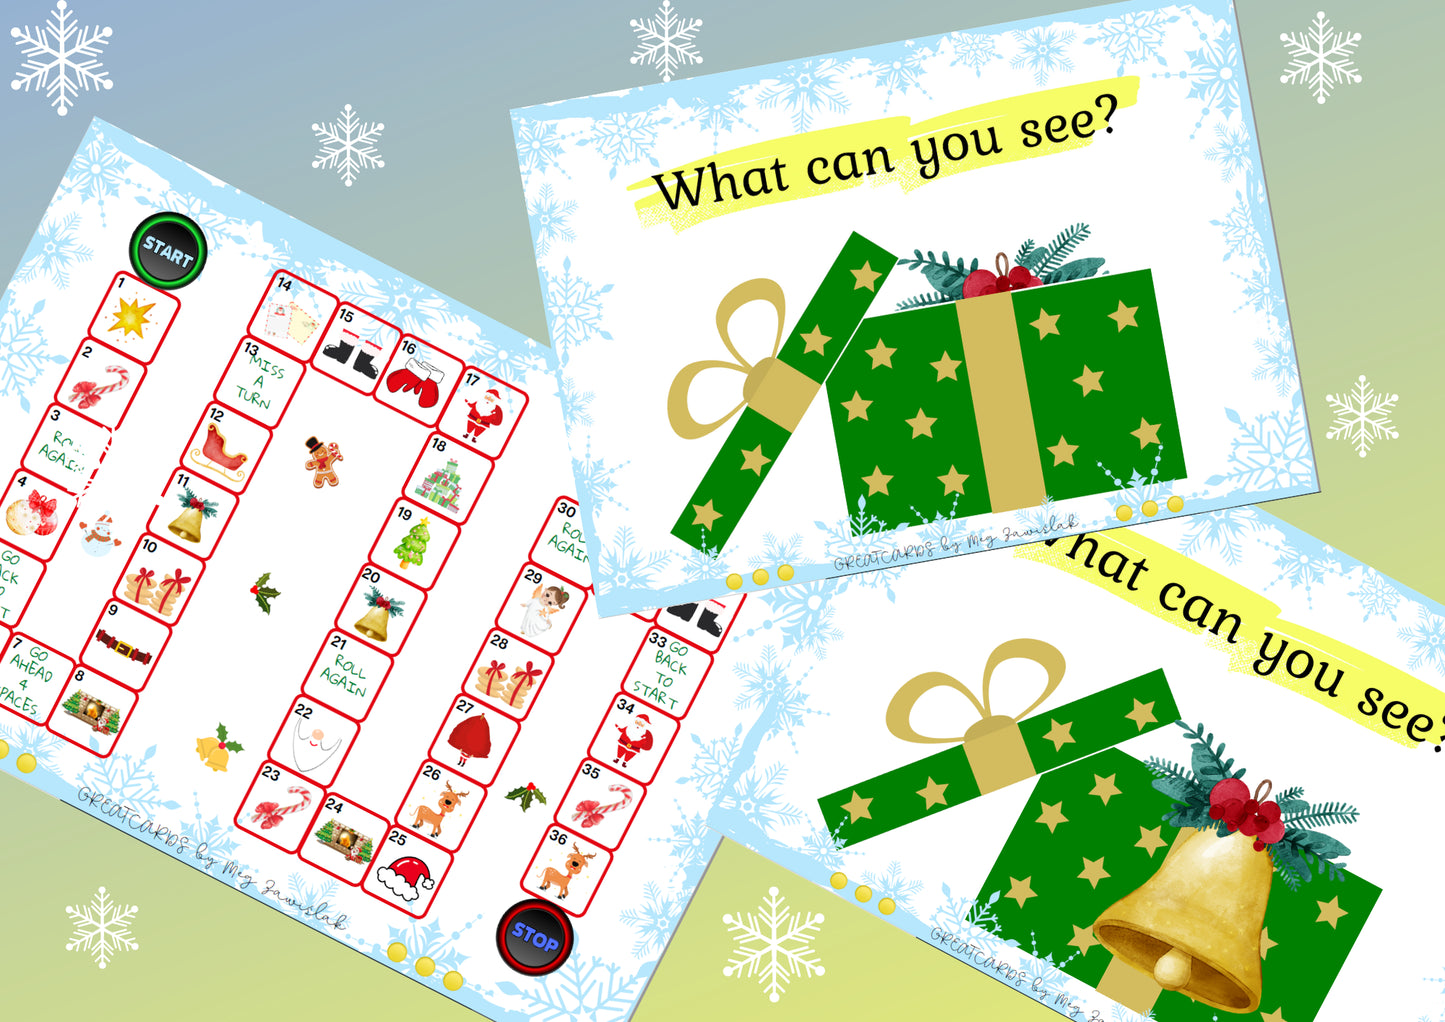 Greatcards - Merry Christmas Santa Claus!